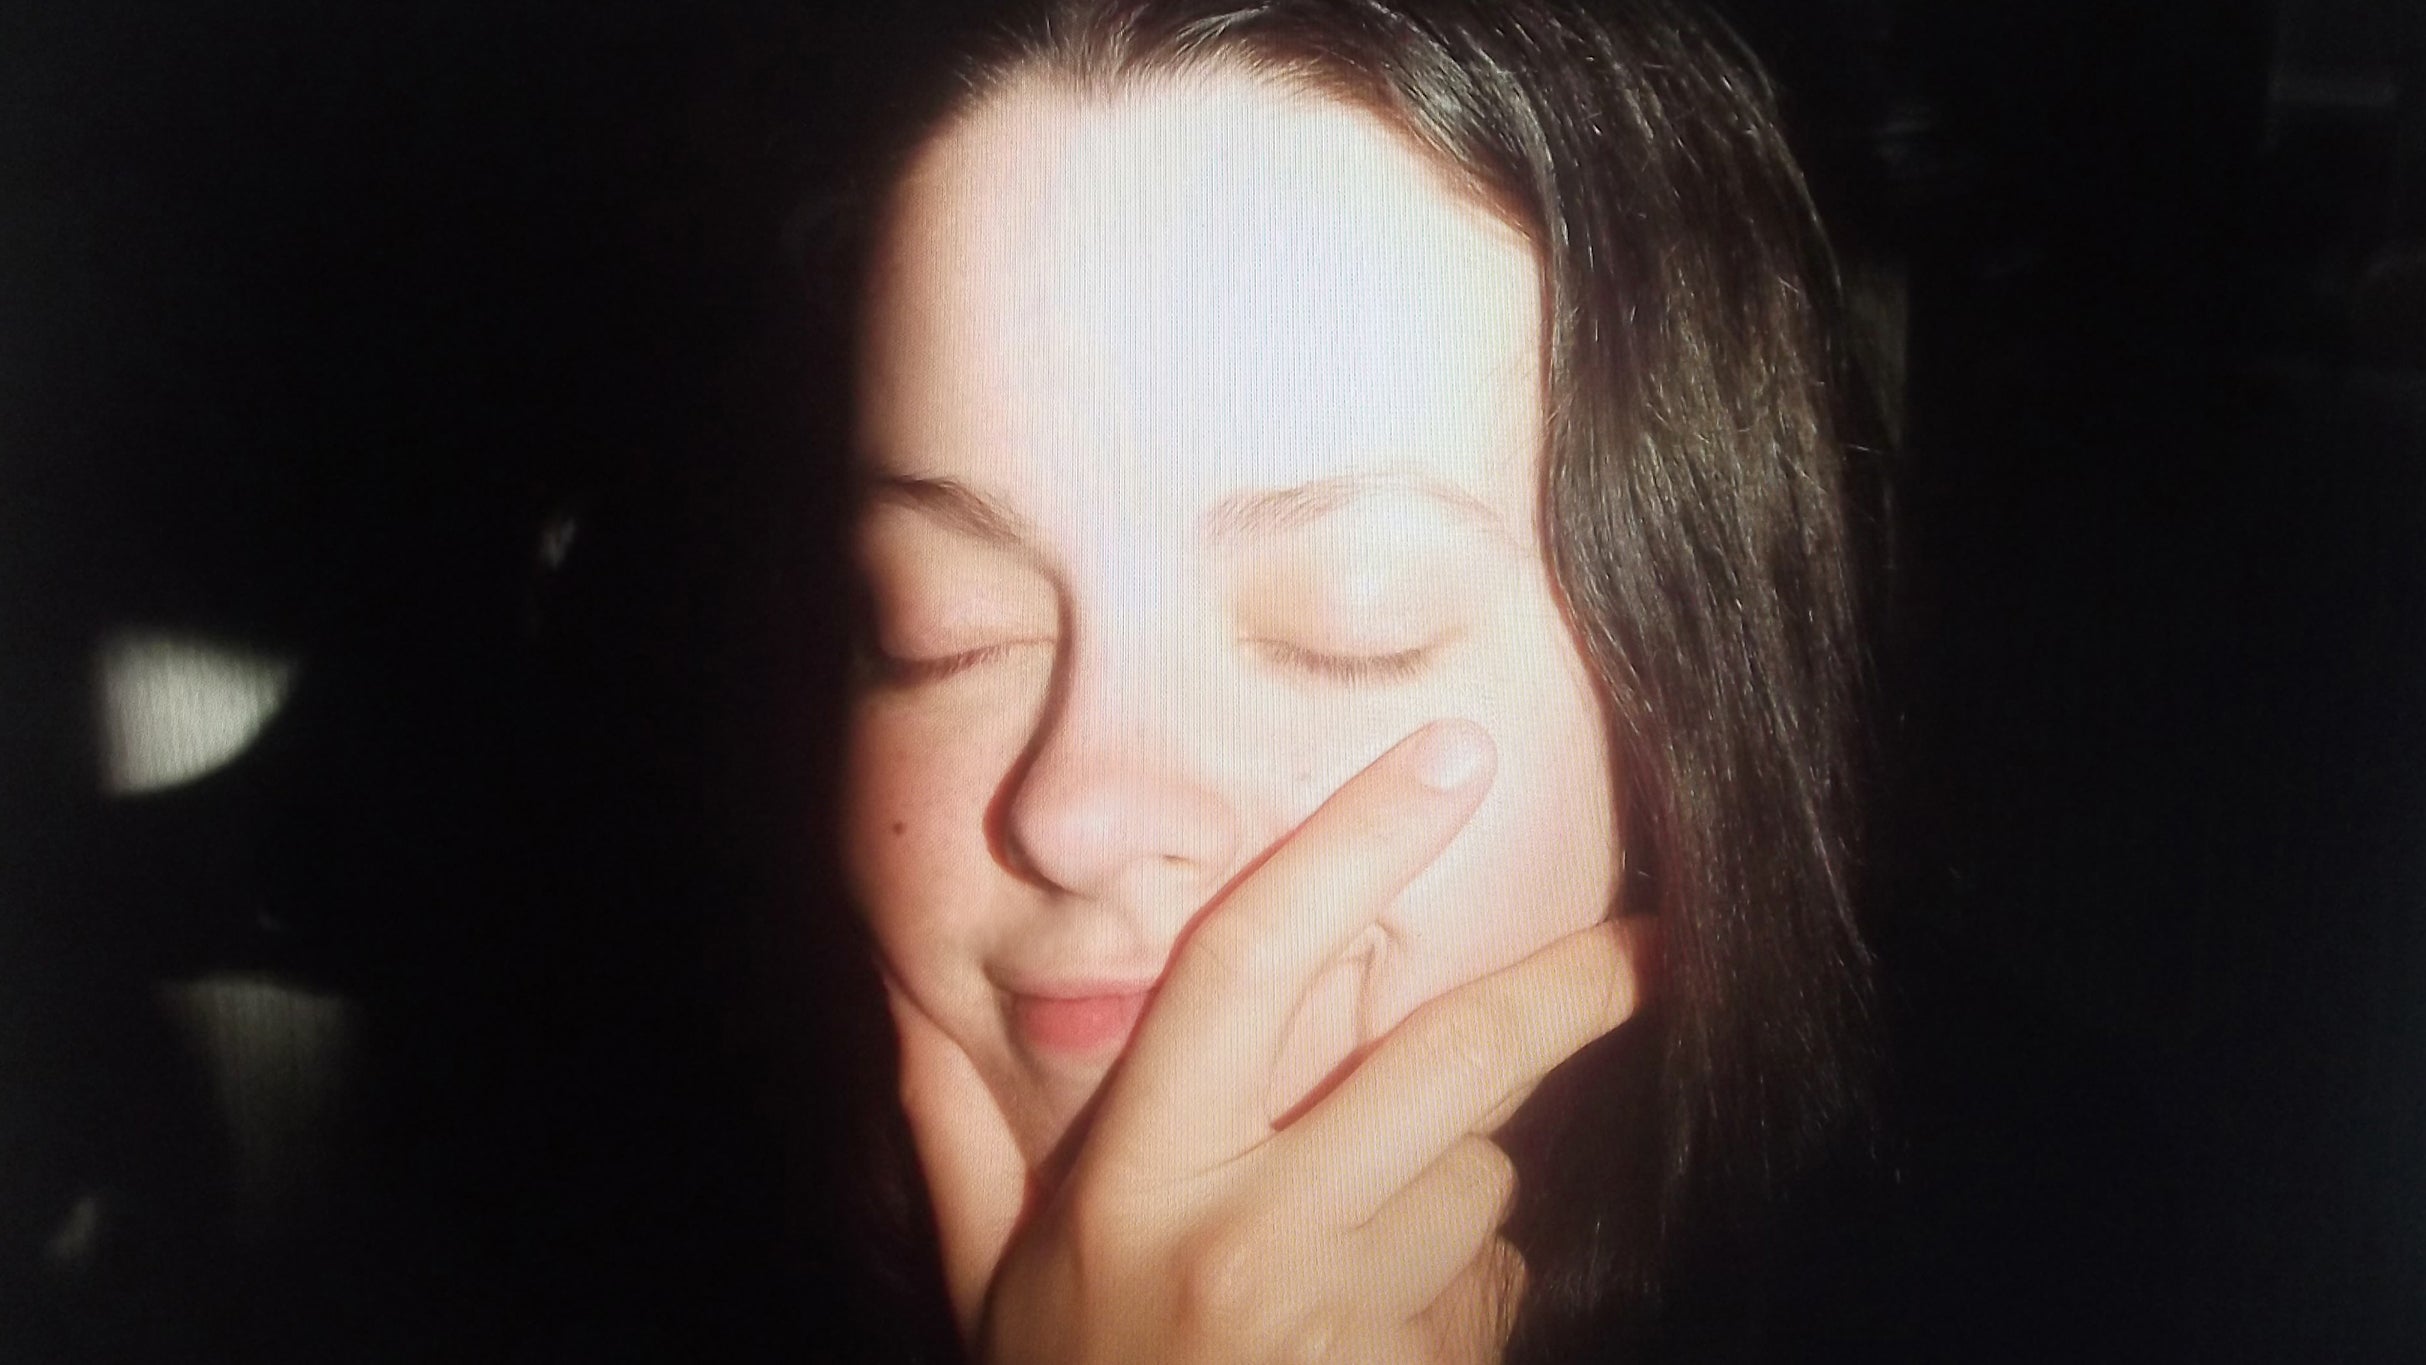 new presale code for Tirzah advanced tickets in Los Angeles